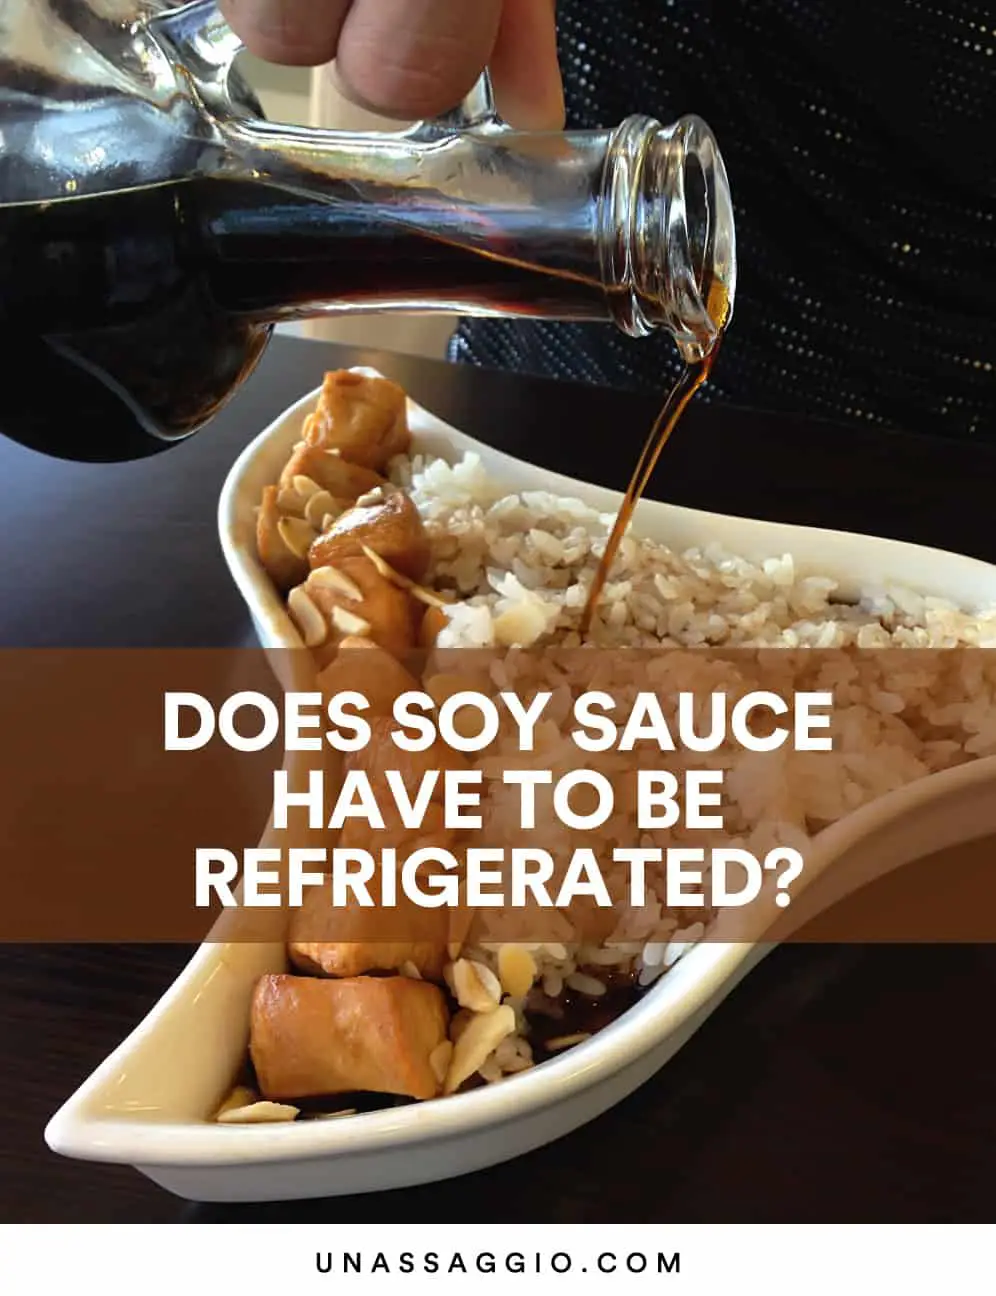 Does Soy Sauce Have To Be Refrigerated?